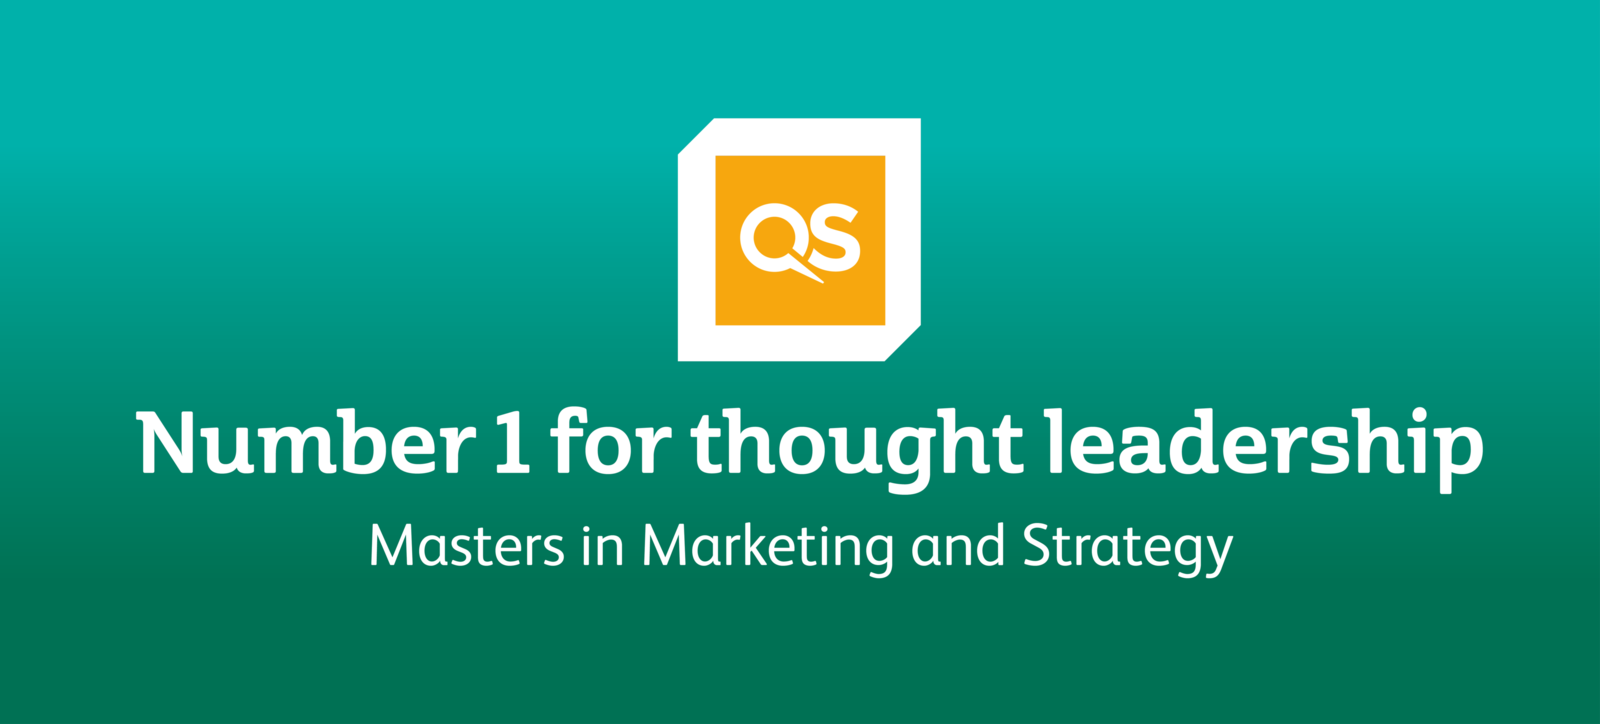 QS logo and description revealing that MSc Marketing and Strategy was ranked number one globally for thought leadership.